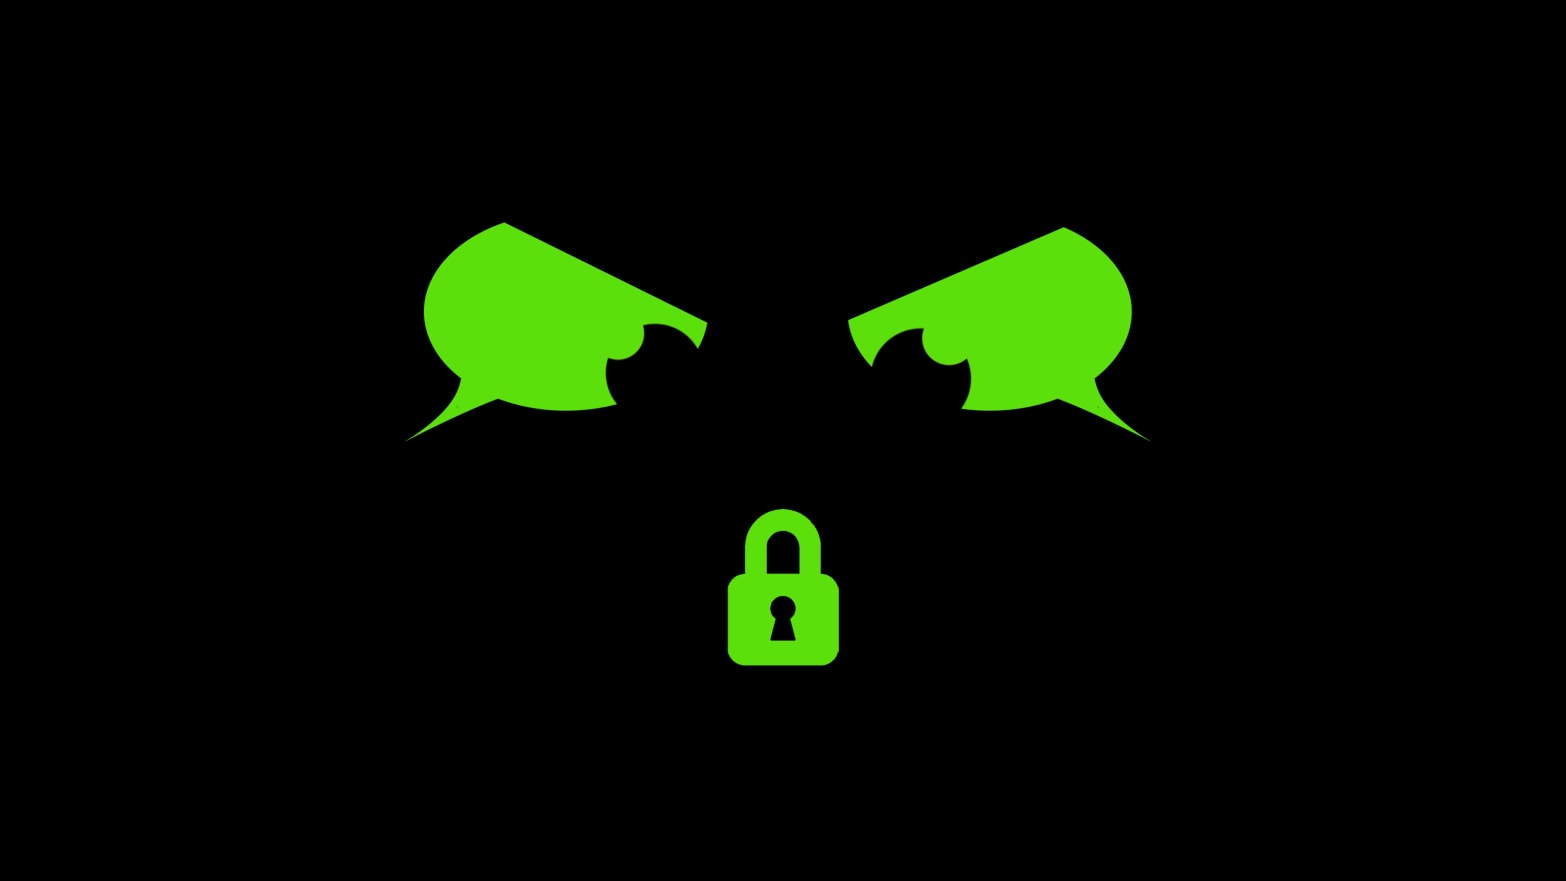 Illustration of an angry face with eyes made of green speech bubbles and a nose made out of a closed lock